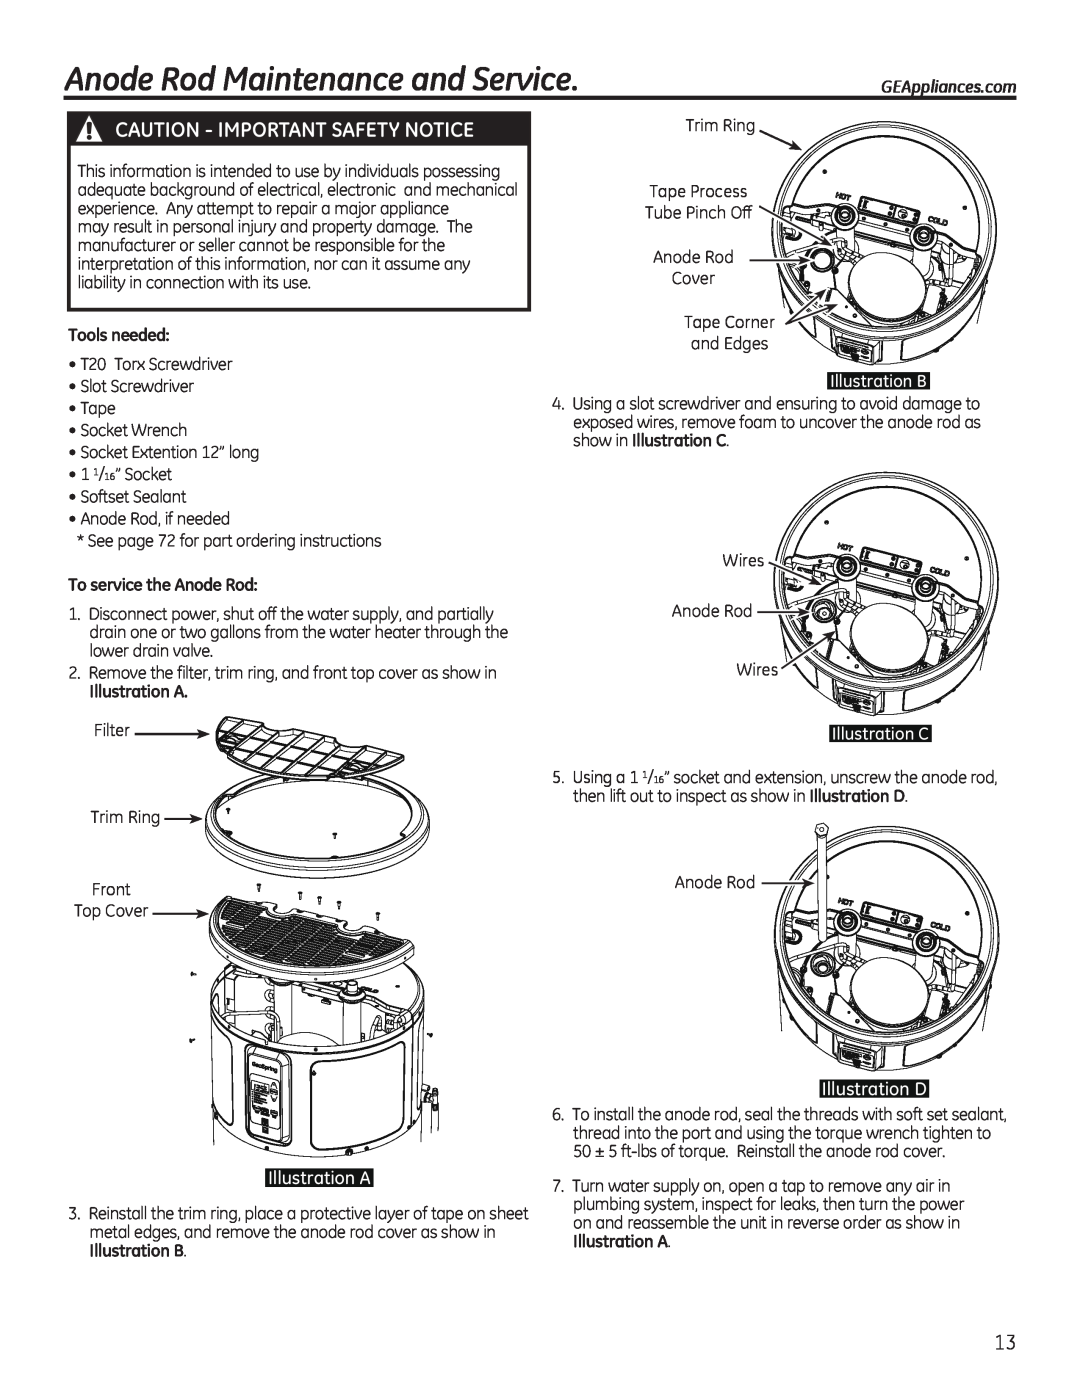 GE GEH50DEED Anode Rod Maintenance and Service, Caution - Important Safety Notice, Illustration A, Illustration D 